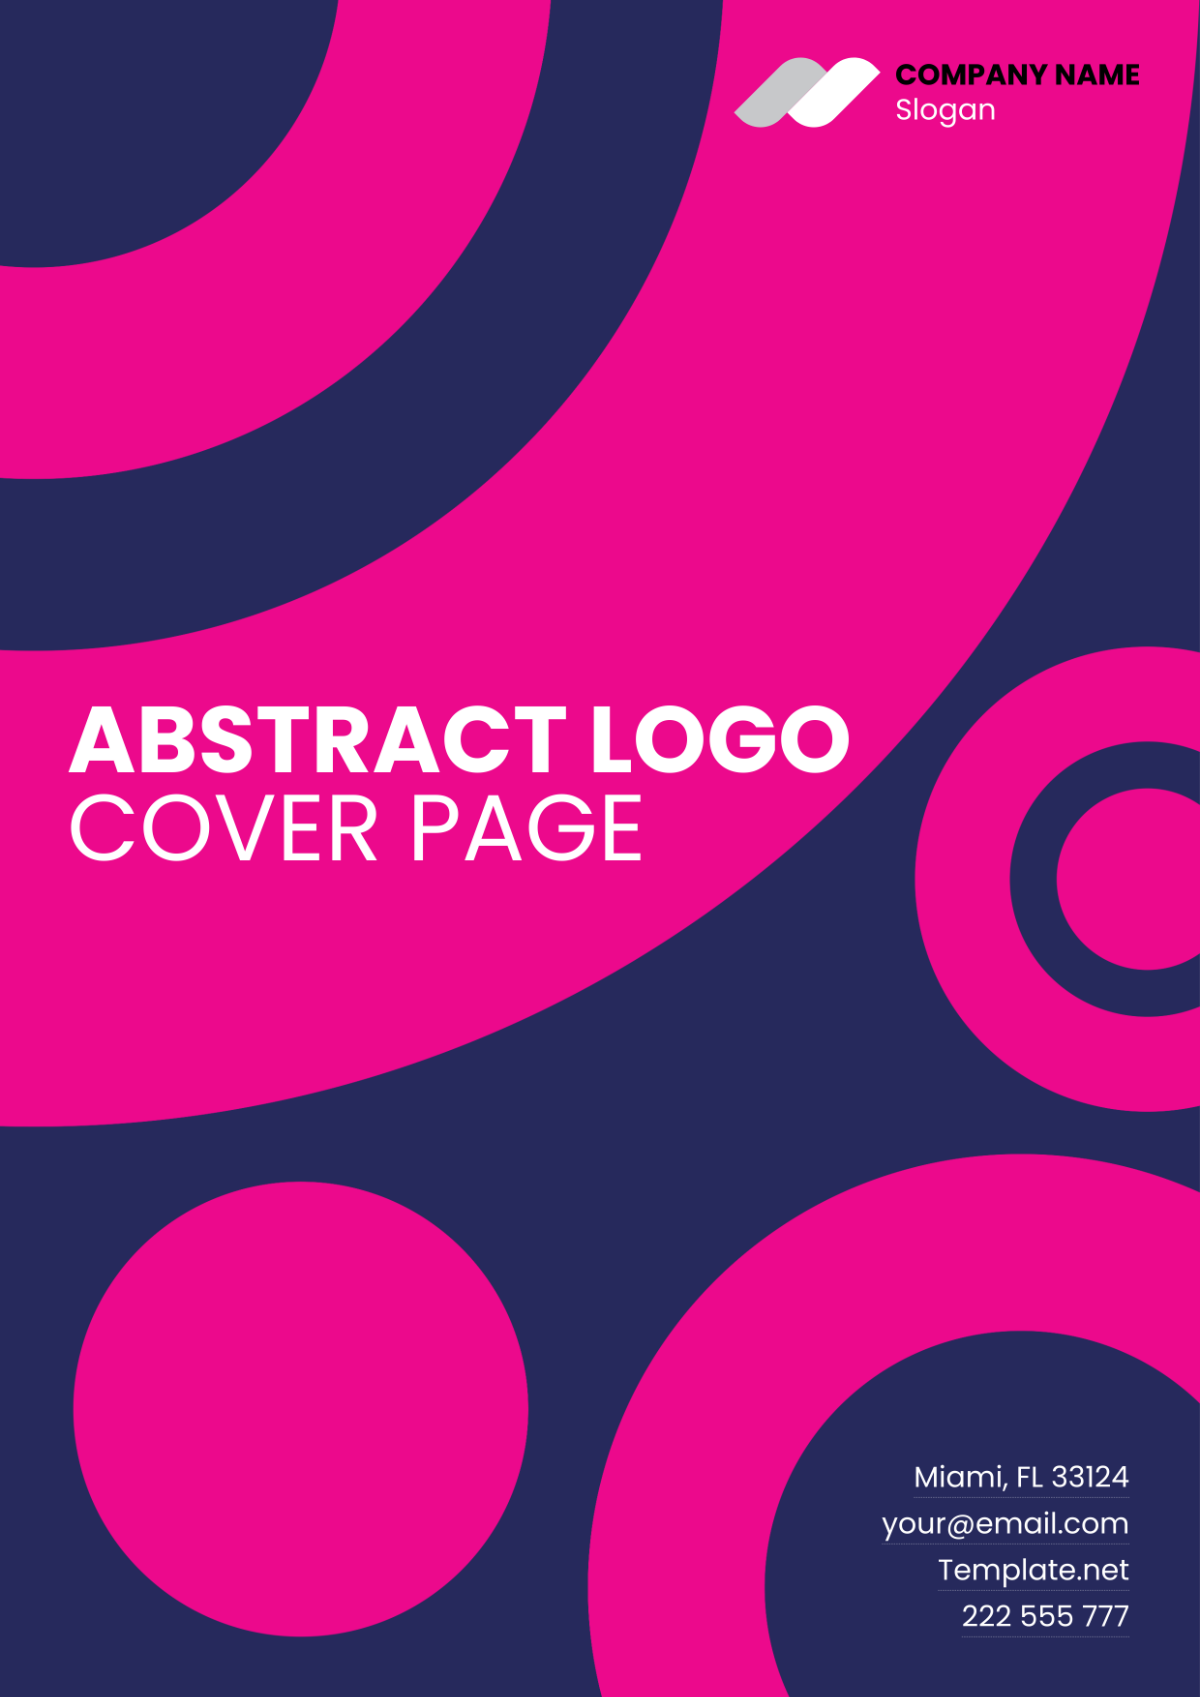 Free Abstract Logo Cover Page Template